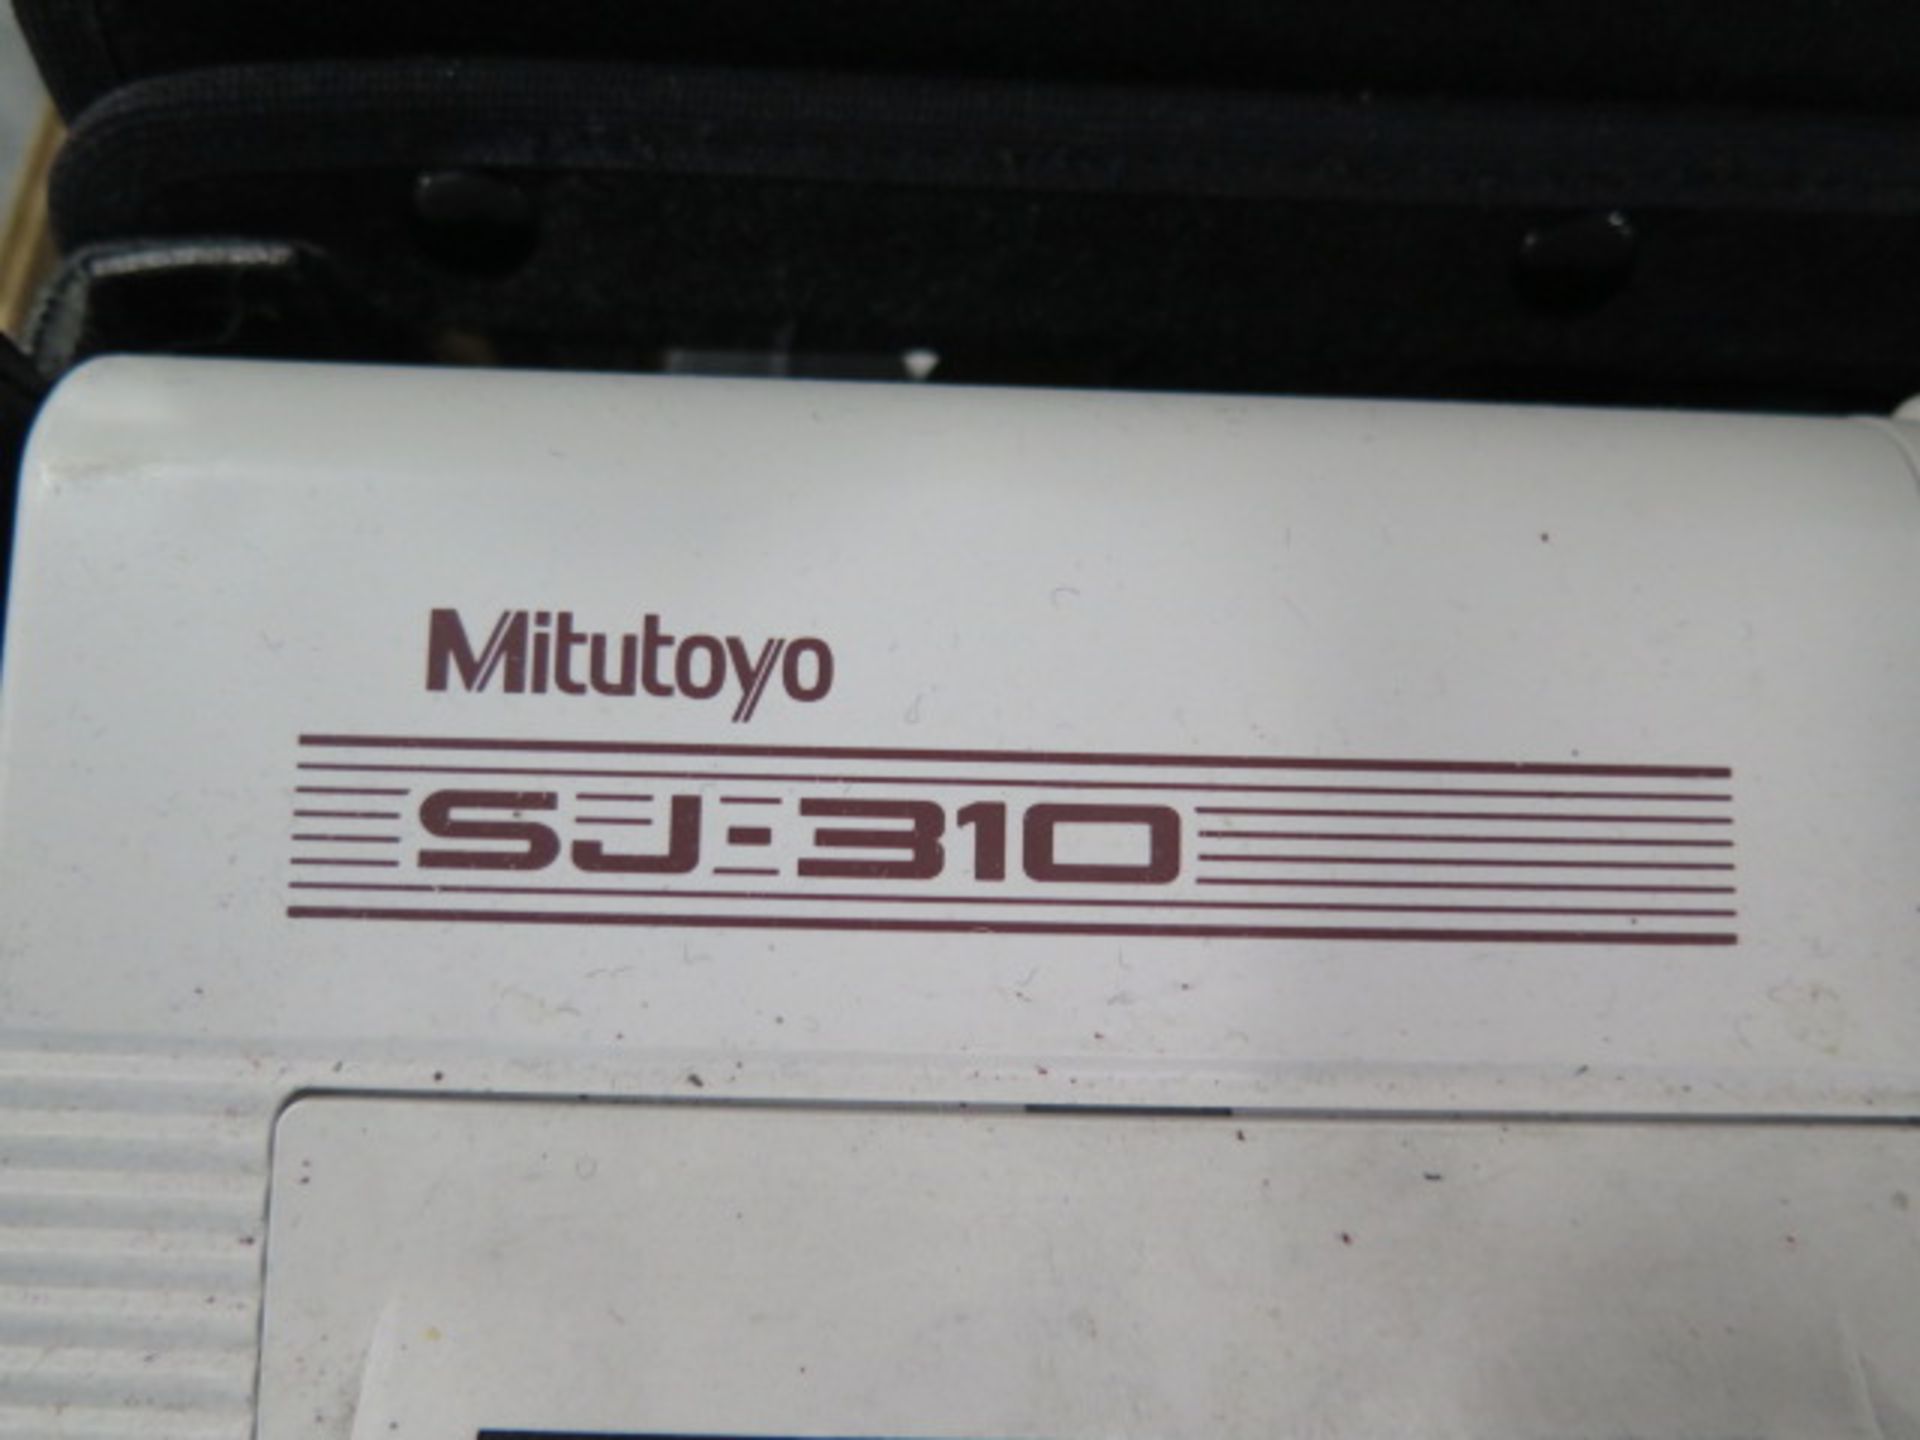 Mitutoyo SJ-310 Surface Roughness Gage w/ Digital Controls, Printer, Mitutoyo 18” Dial SOLD AS IS - Image 8 of 8